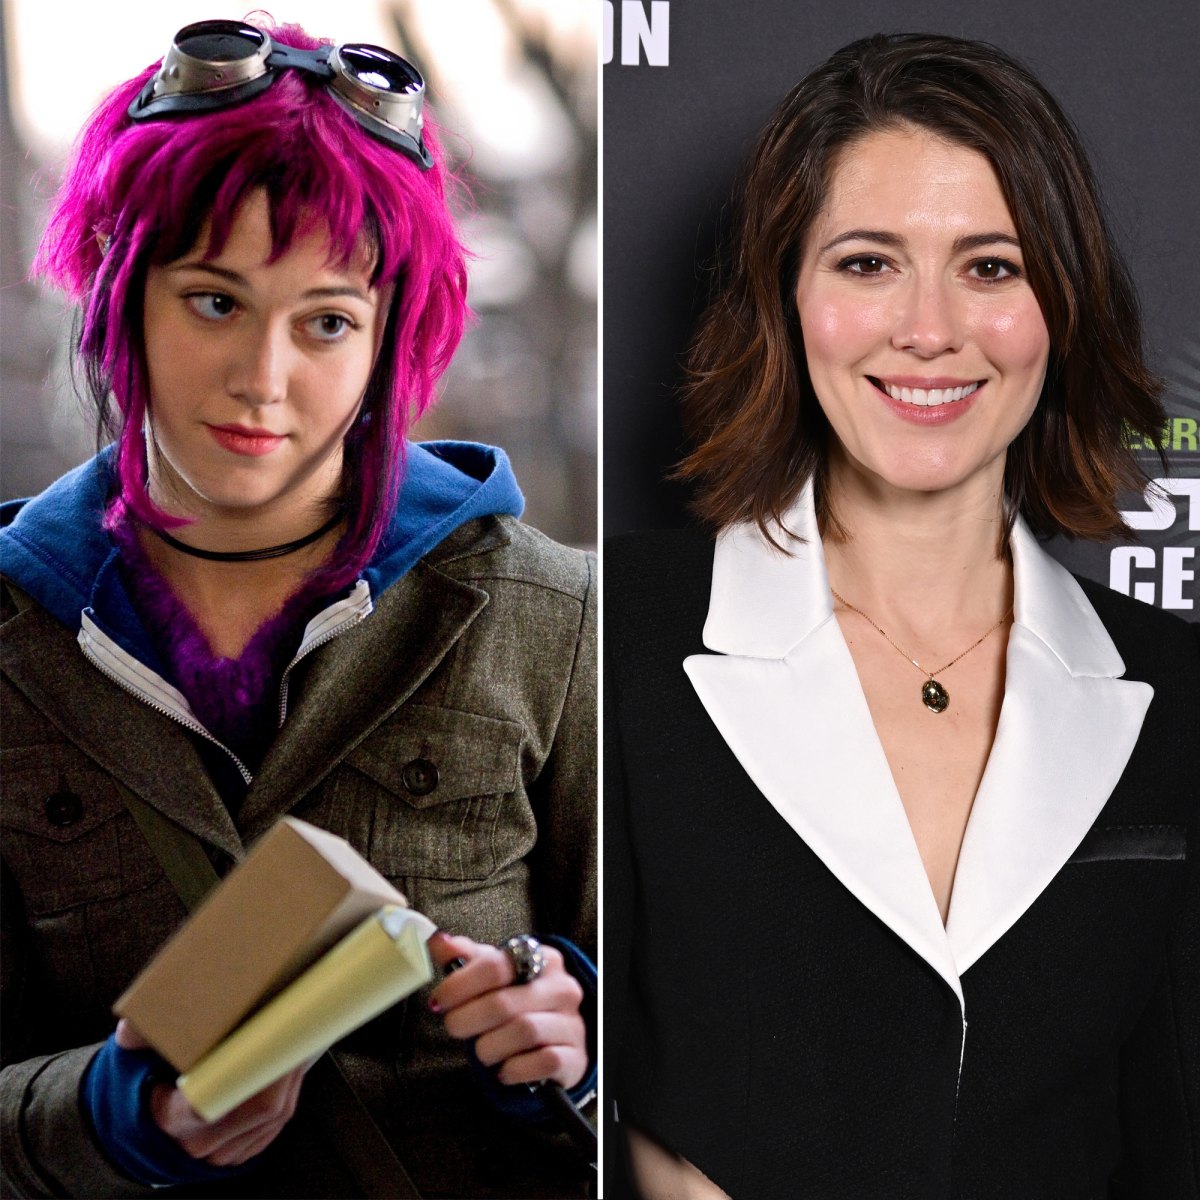 Scott Pilgrim Vs. The World Premiered A Decade Ago, So Here's What The  Cast Looks Like Now